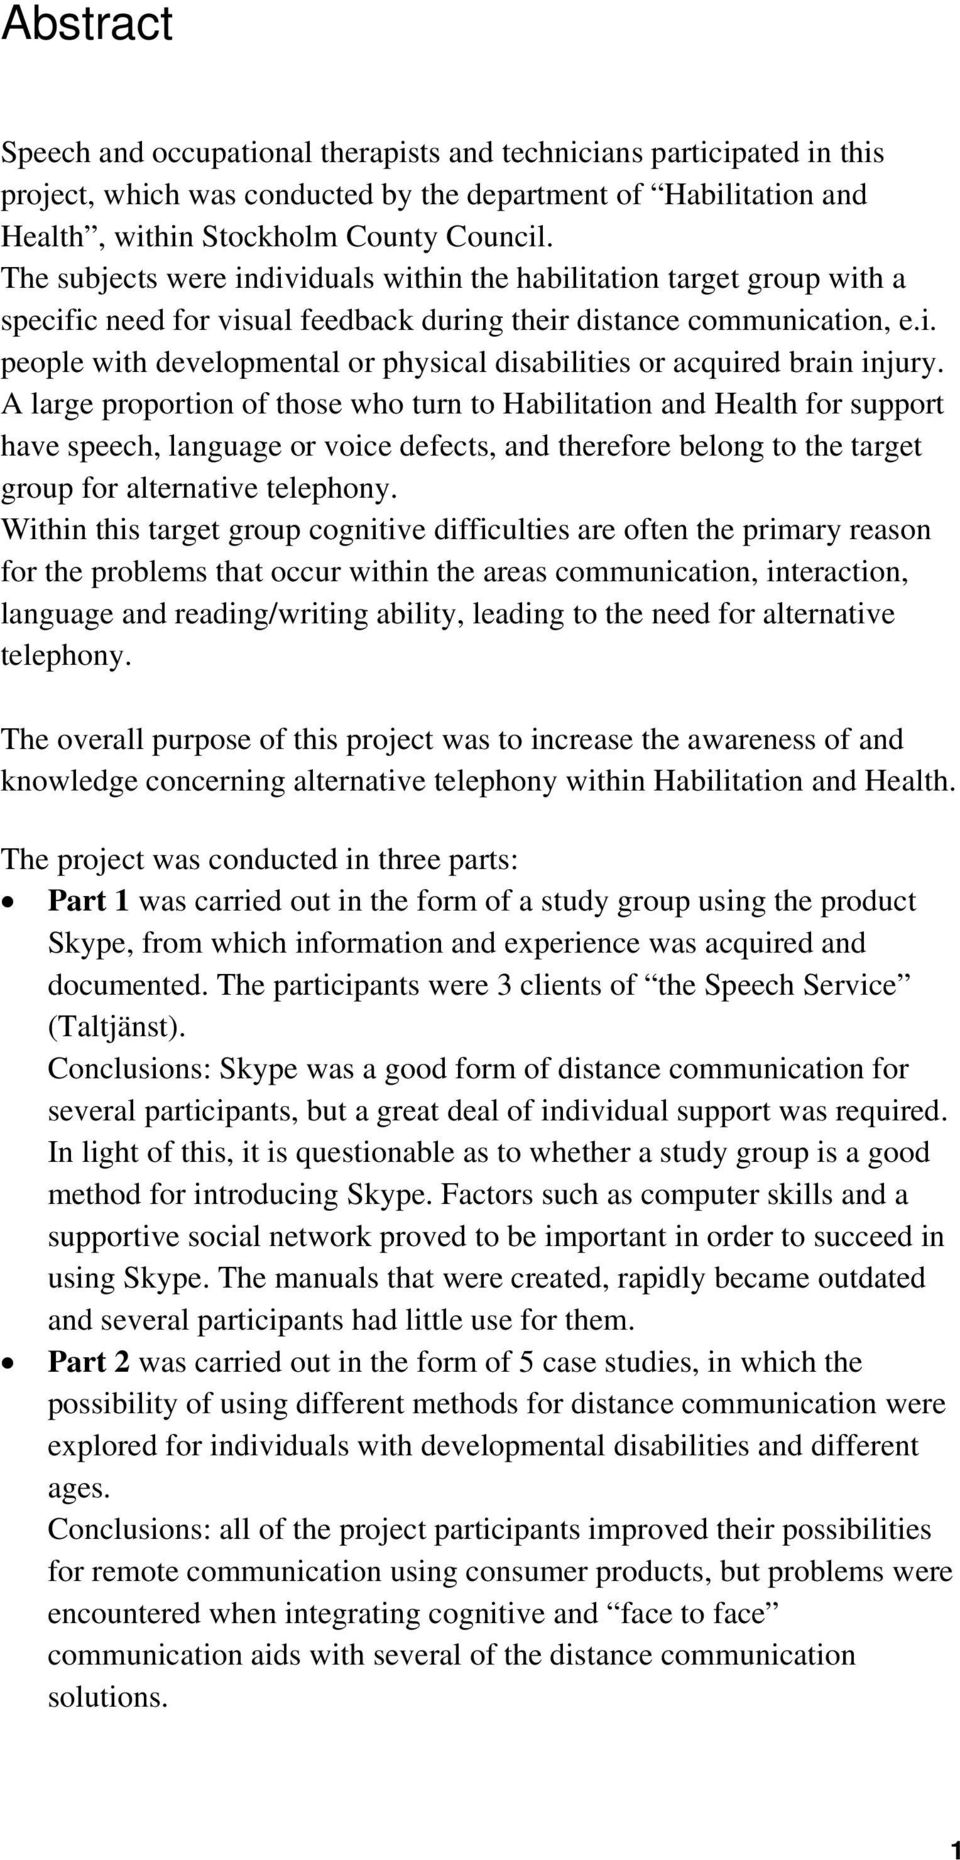 A large proportion of those who turn to Habilitation and Health for support have speech, language or voice defects, and therefore belong to the target group for alternative telephony.